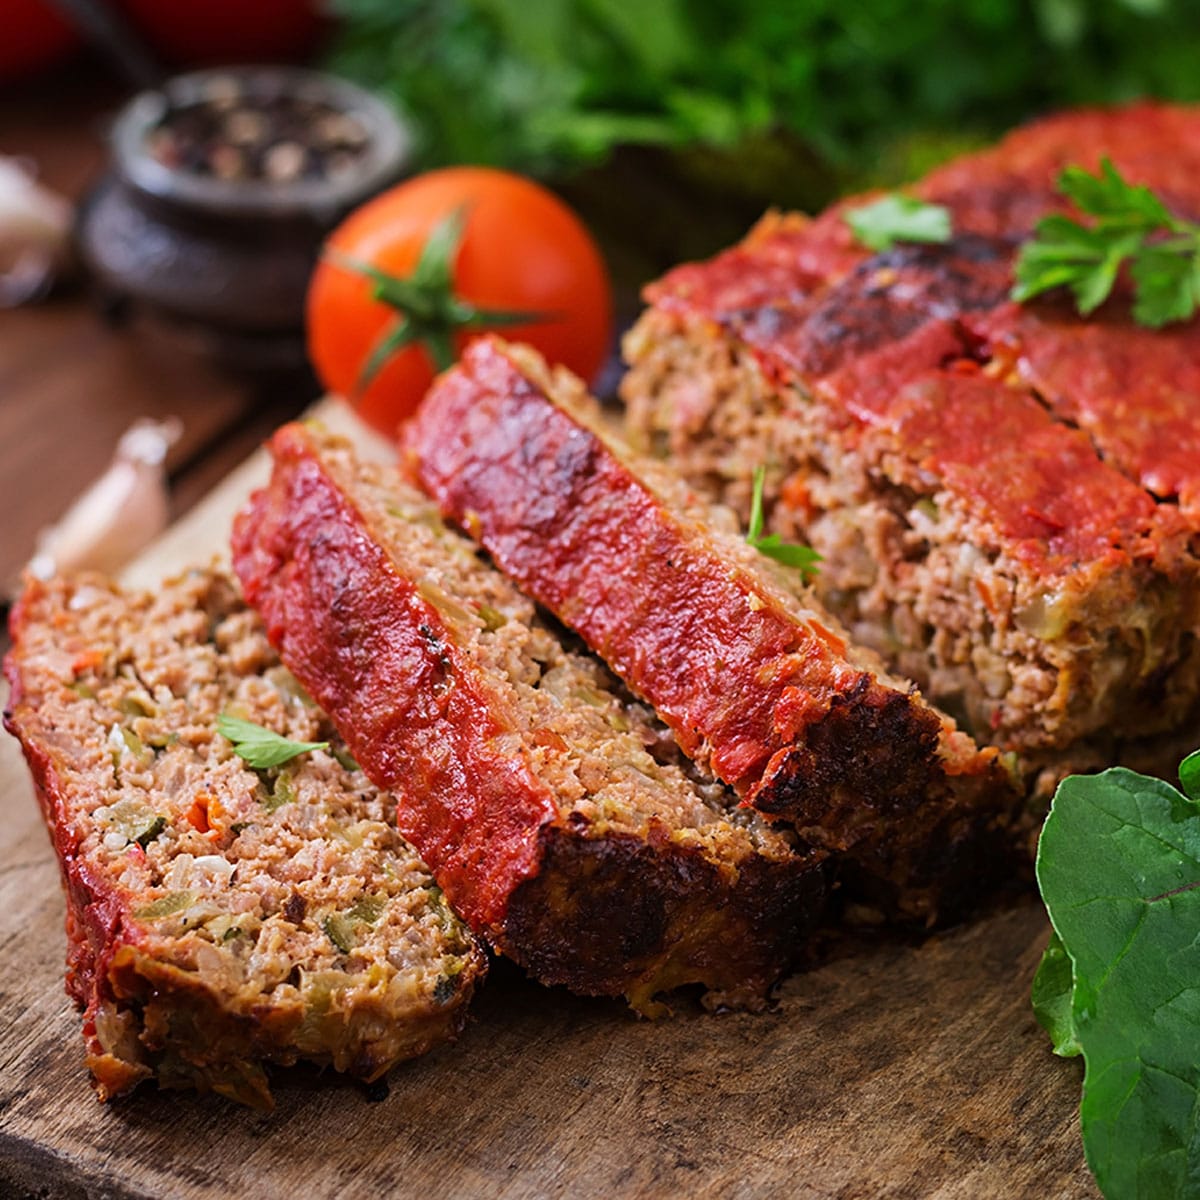 How to reheat a meatloaf without drying? Use low temperature and cover it with aluminum foil (oven) or a paper kitchen towel (microwave).